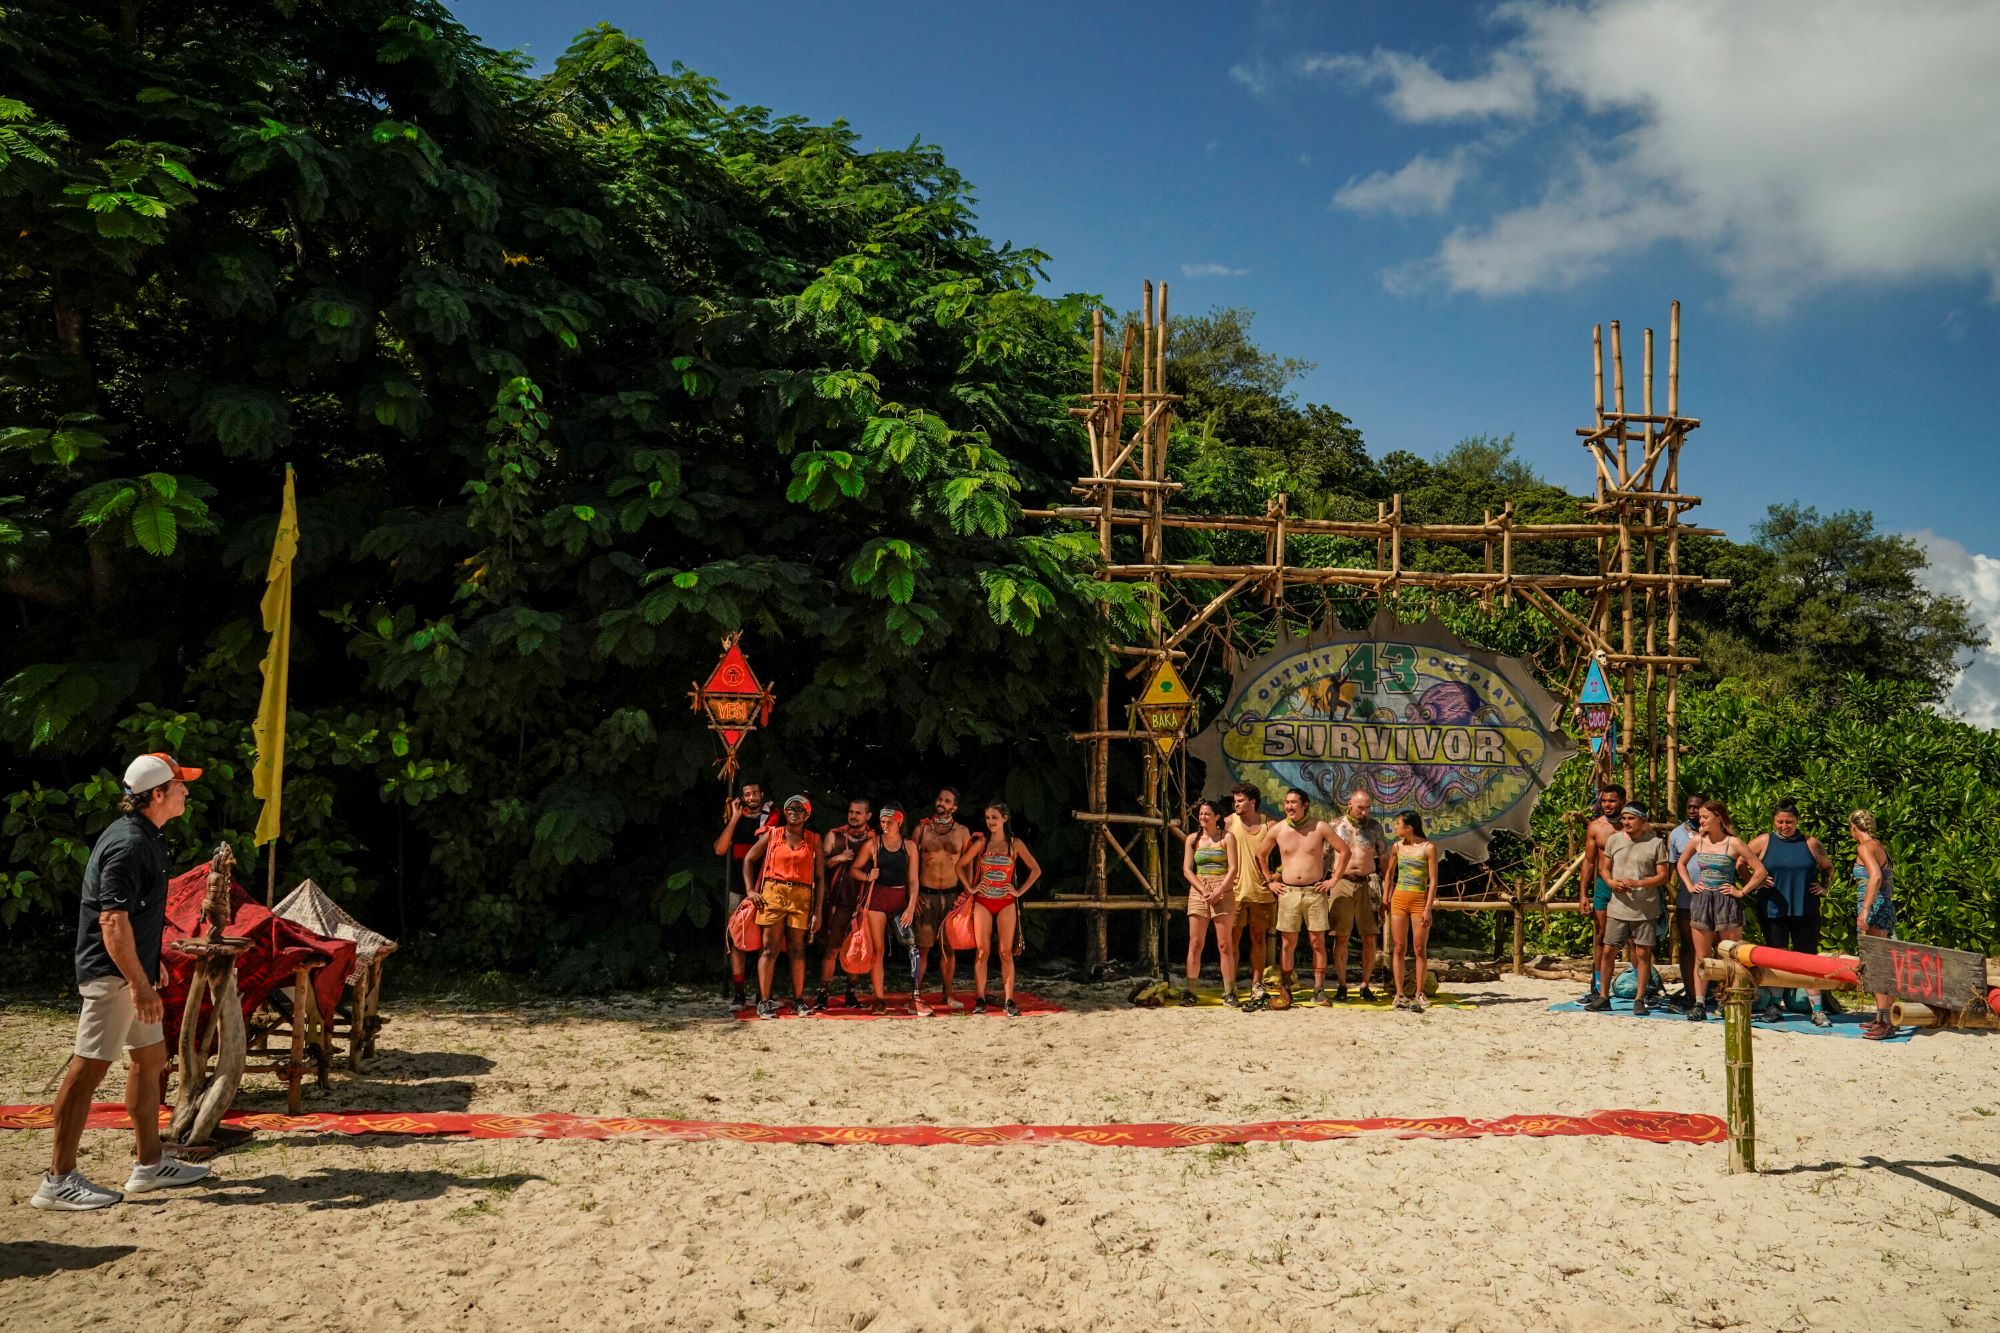 Host Jeff Probst explains a challenge to the 'Survivor' Season 43 castaways, who, according to spoilers, will face a storm in episode 2.